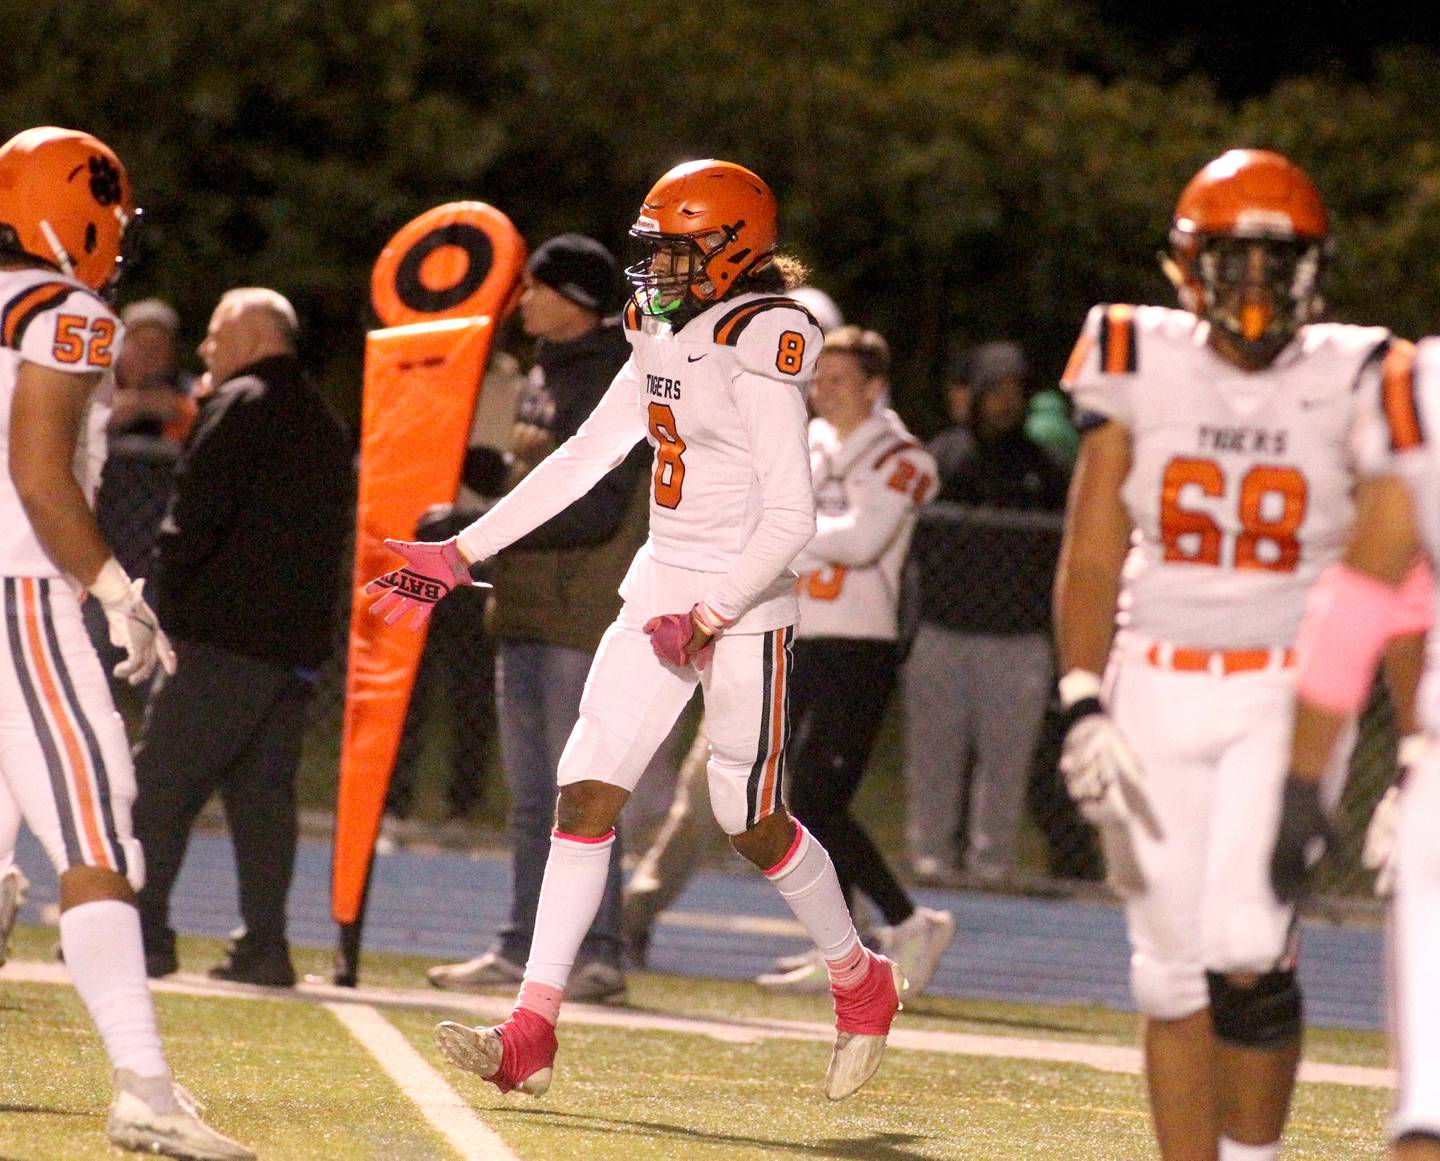 Wheaton Warrenville South’s Braylen Meredith (8) celebrates his touchdown during a game at Wheaton North on Friday, Oct. 7, 2022.